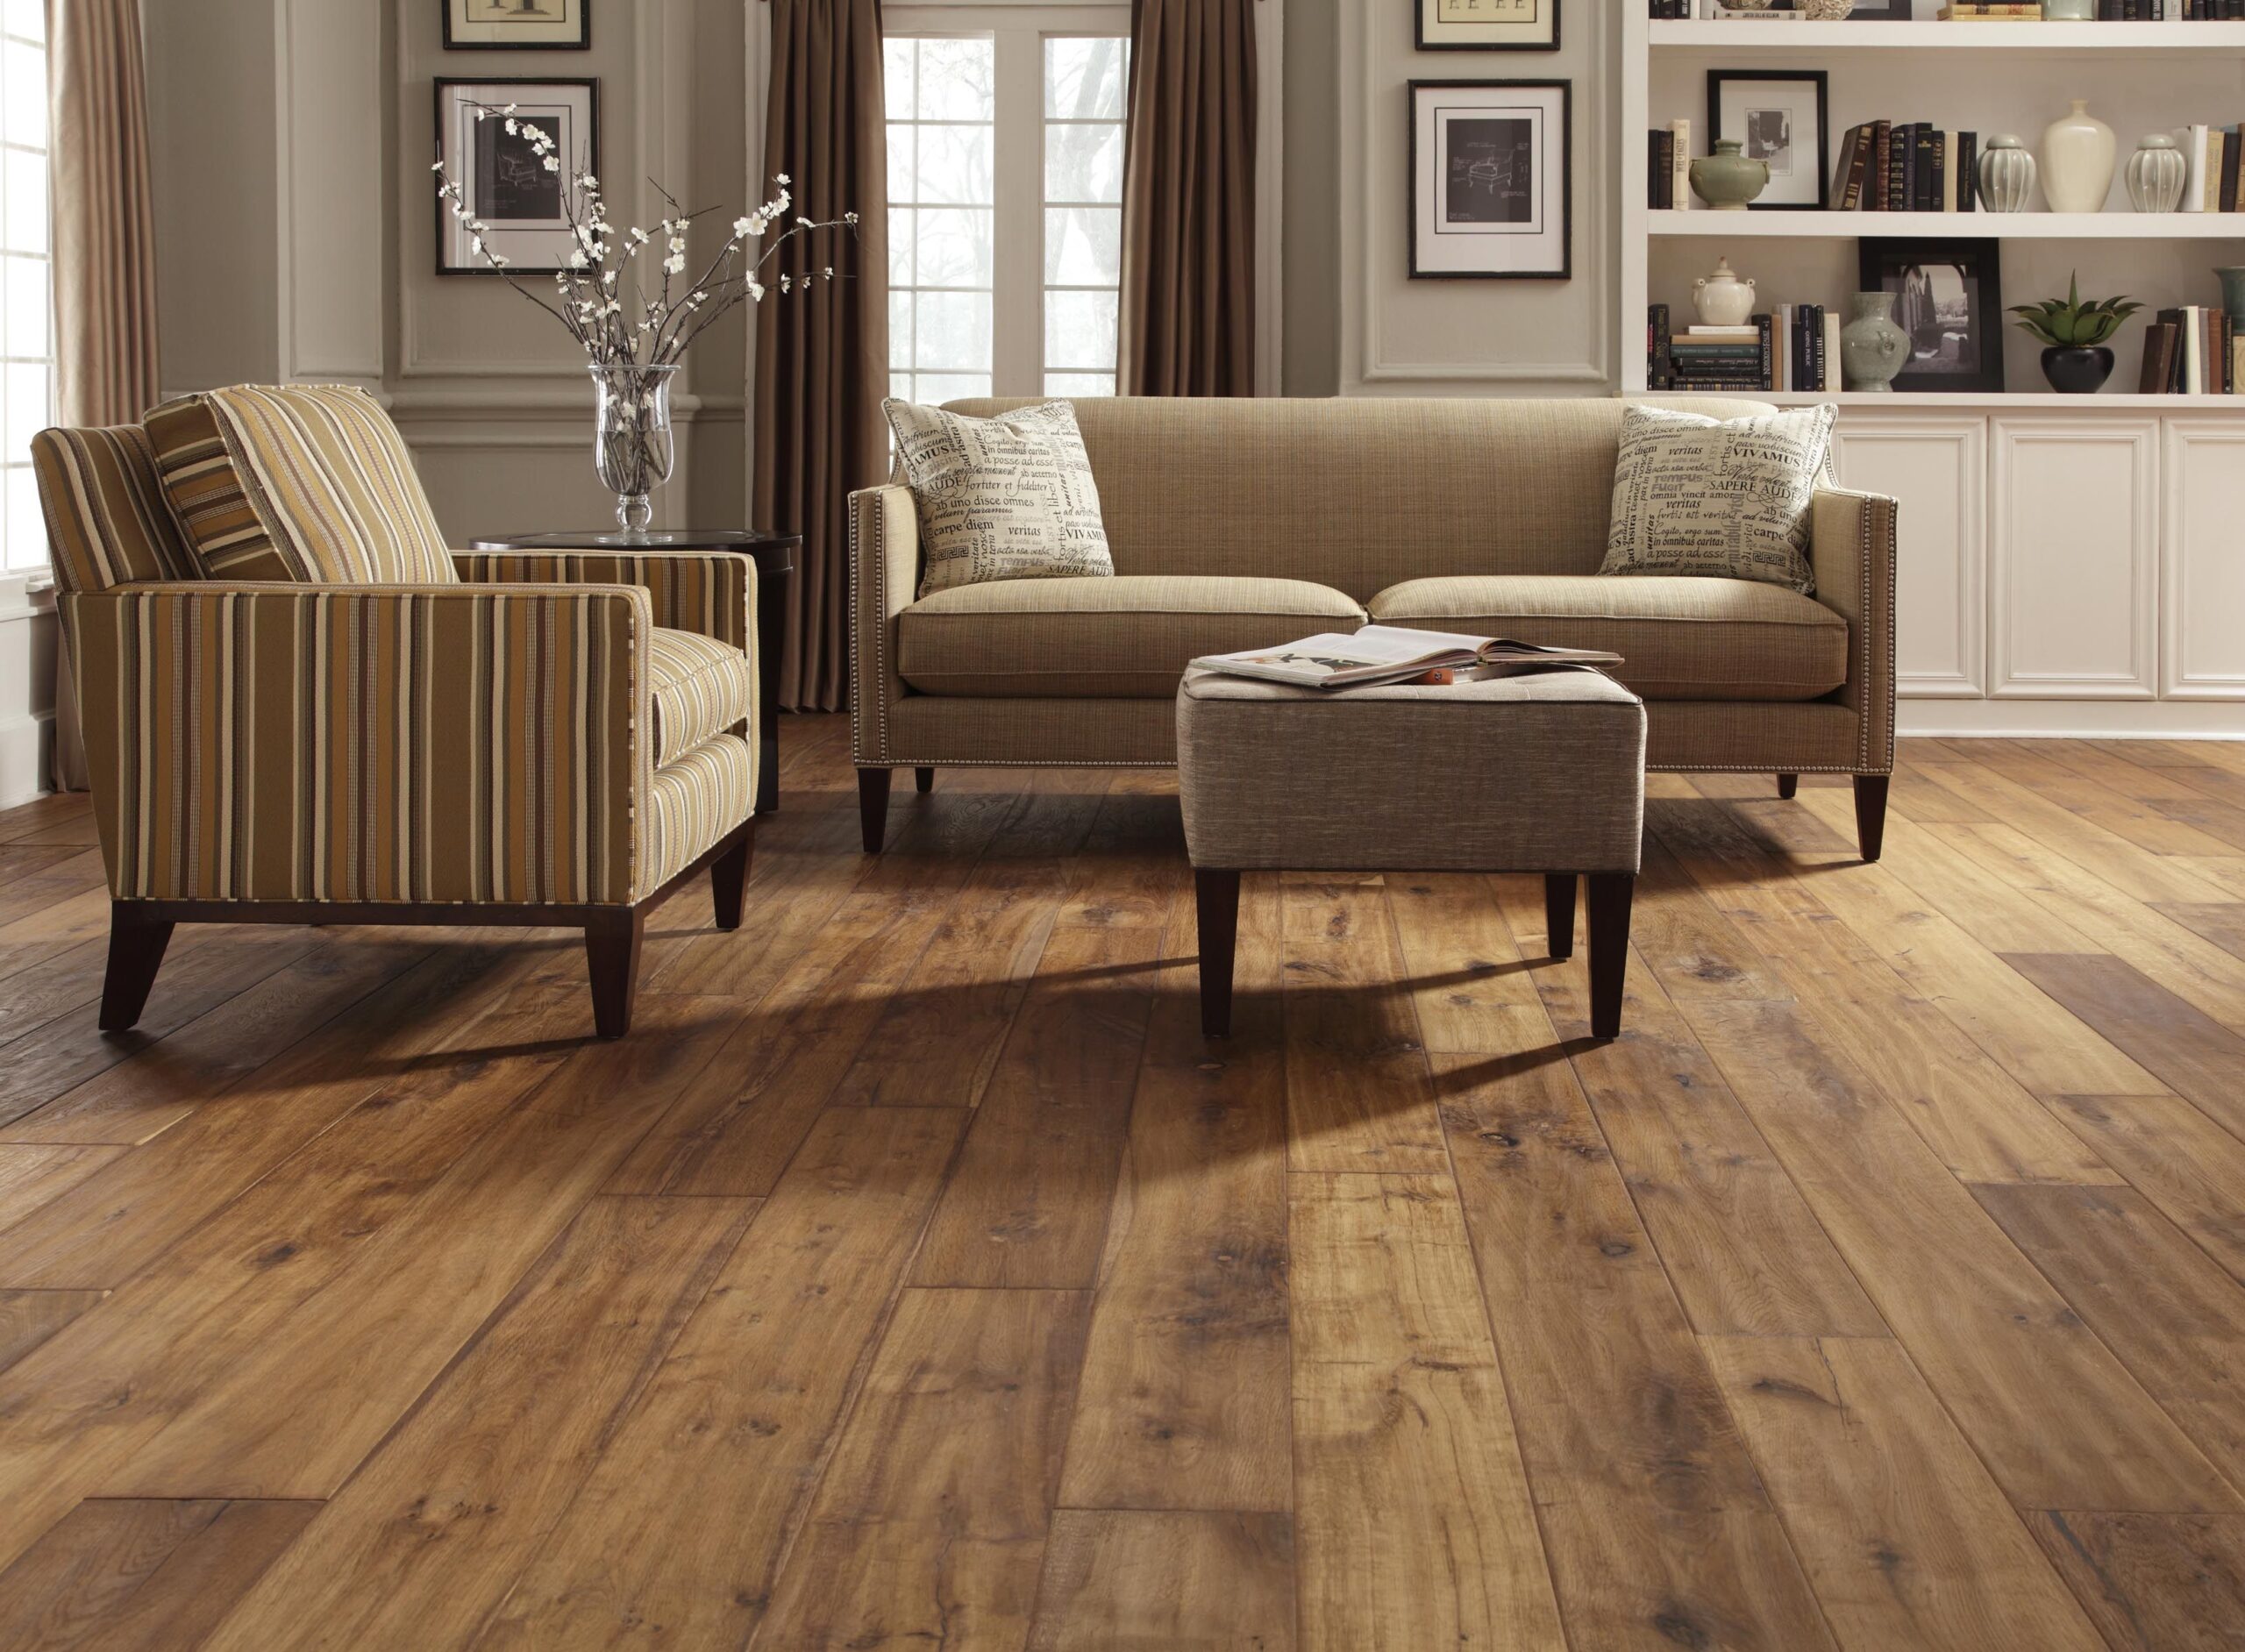 5 Best Laminate Flooring Colours For, Wood Flooring Or Laminate Which Is Best